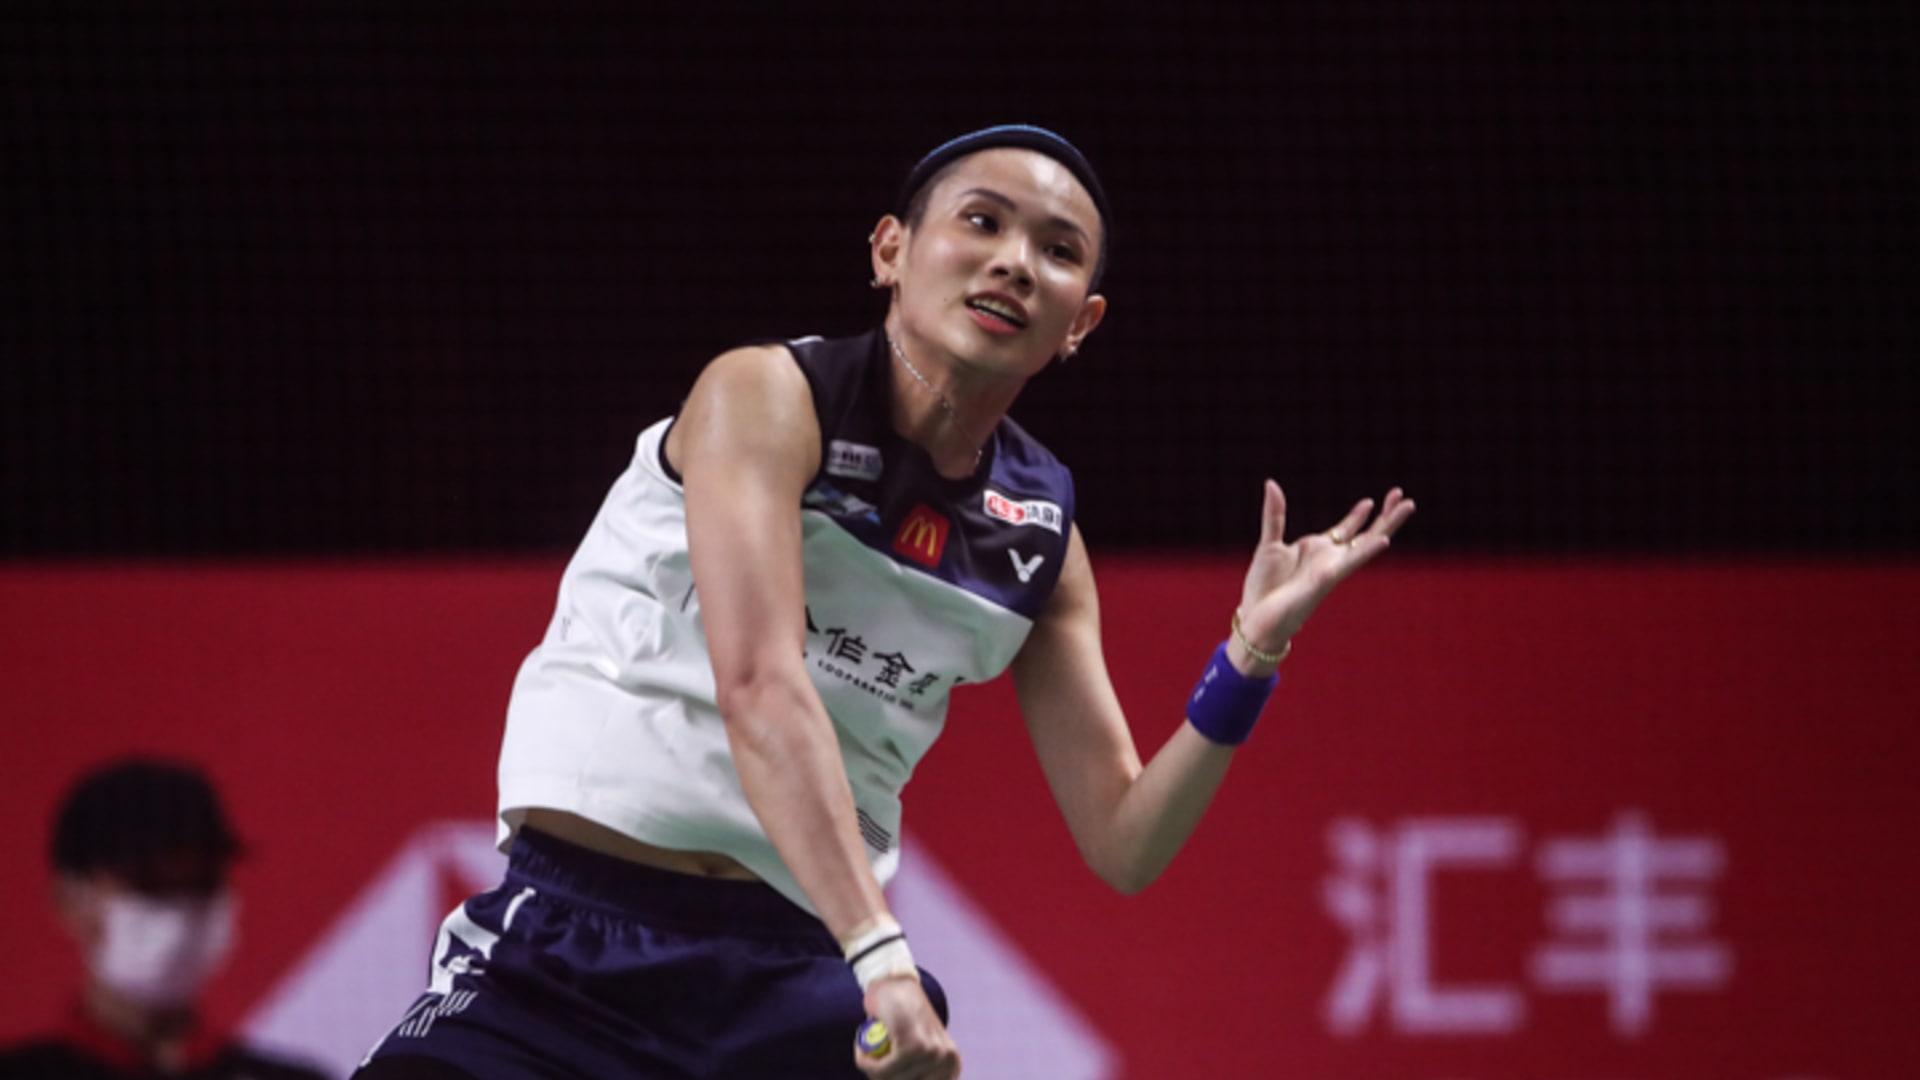 AS IT HAPPENED - BWF World Tour Finals, Day 5: Finals day in